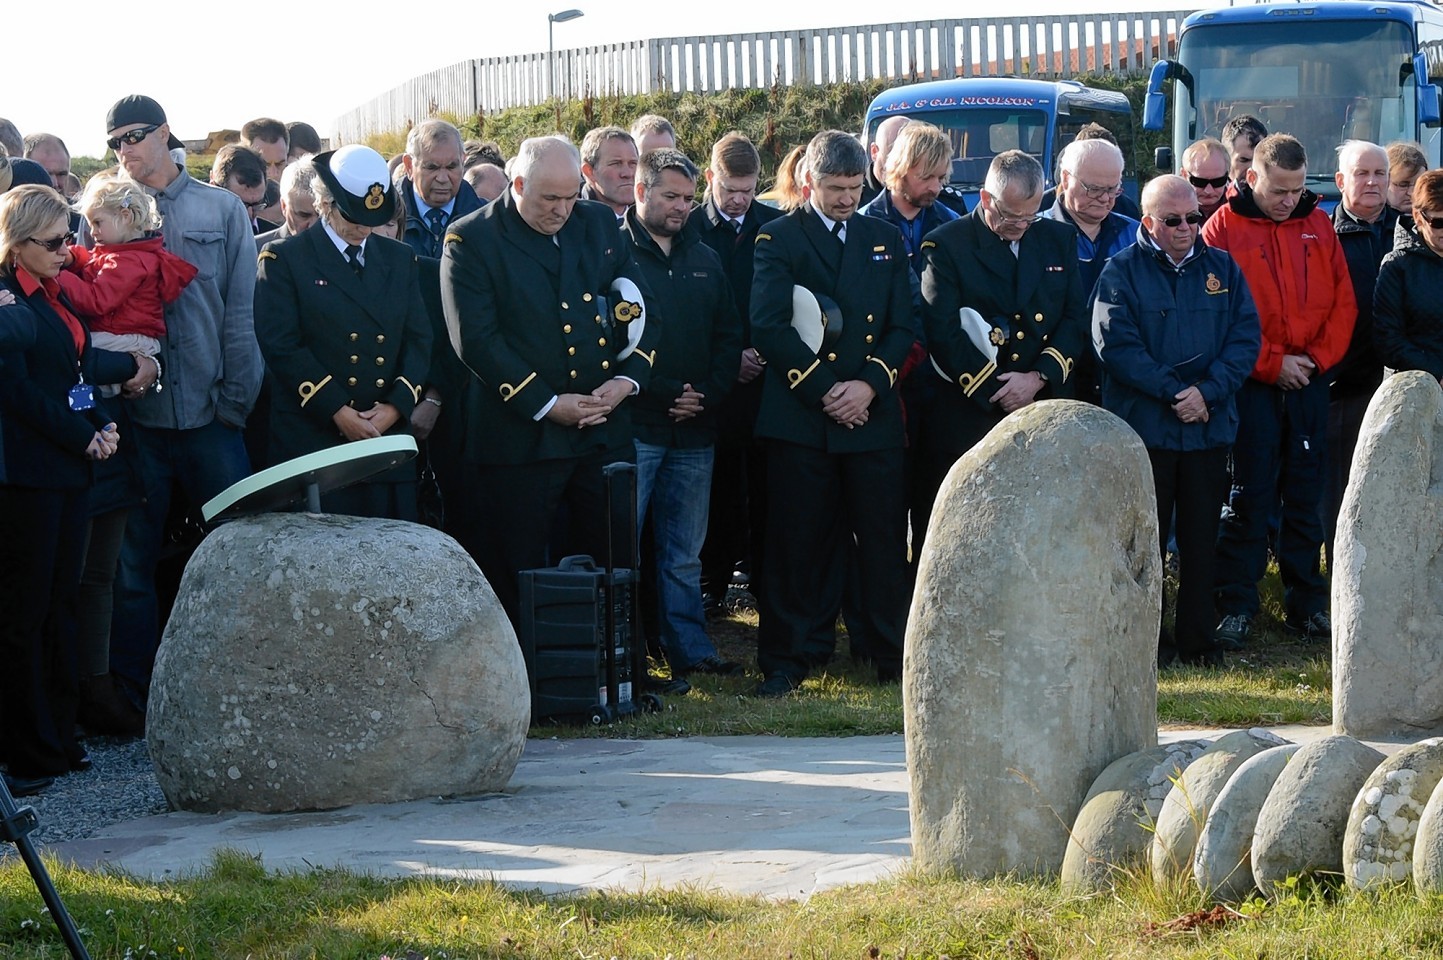 Sumburgh helicopter memorial service